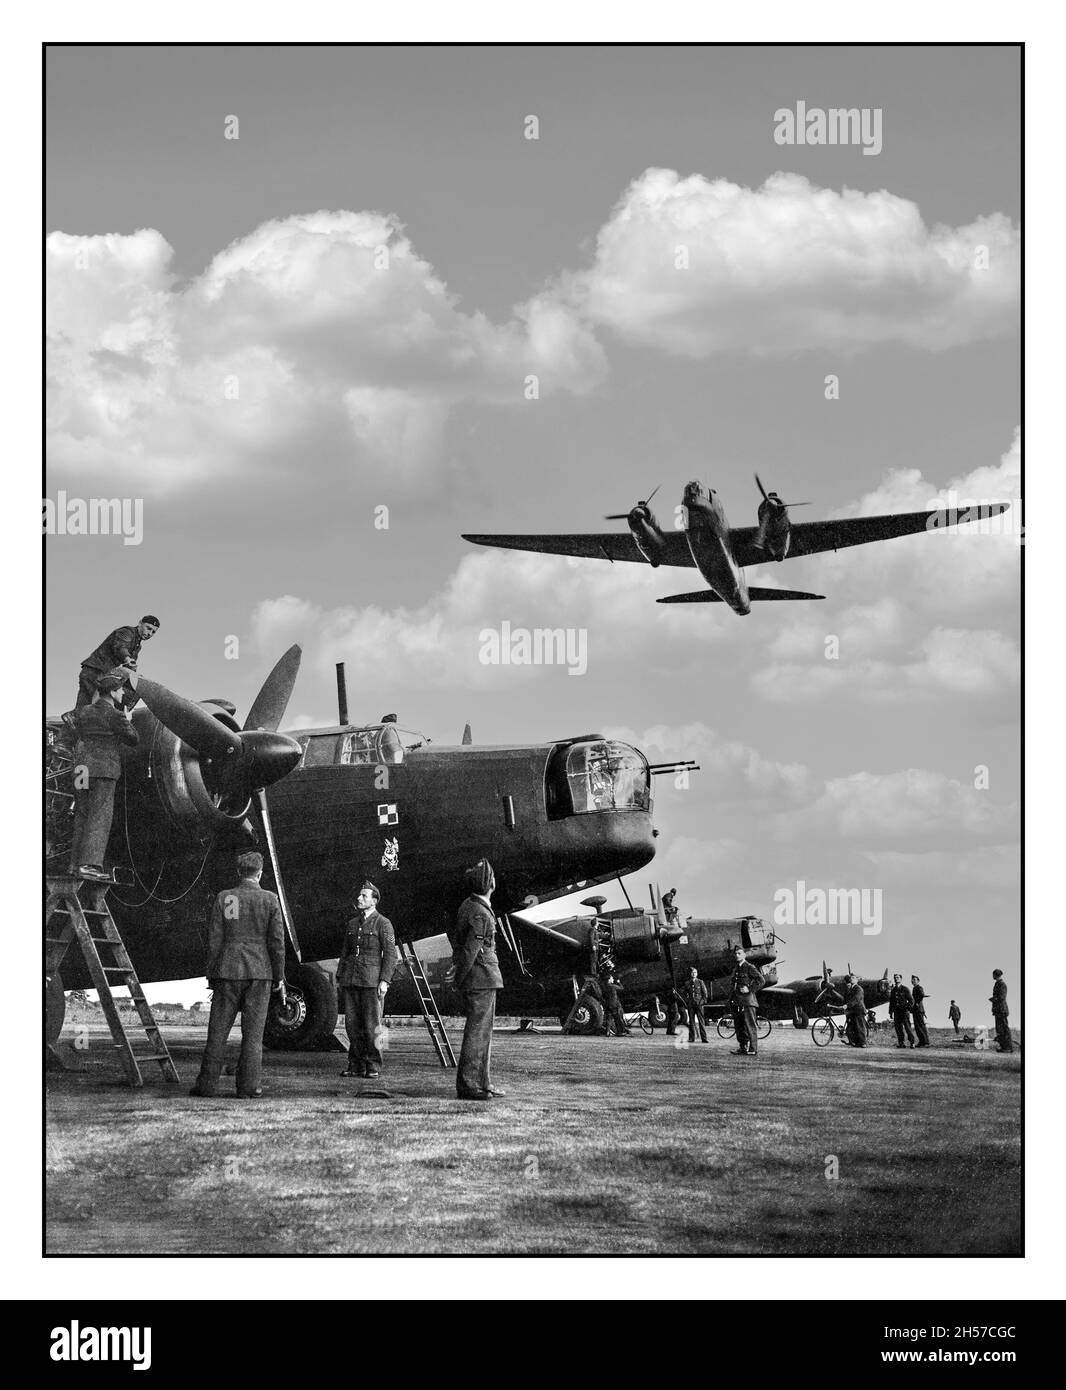 WW2 Wellington Bombers with ground crews working and preparing a turnaround on their Vickers Wellington bombers Mk Xs as a Wellington Bomber takes off and flies overhead at RAF Hemswell in Lincolnshire, UK 1943 World War II Britain UK Stock Photo